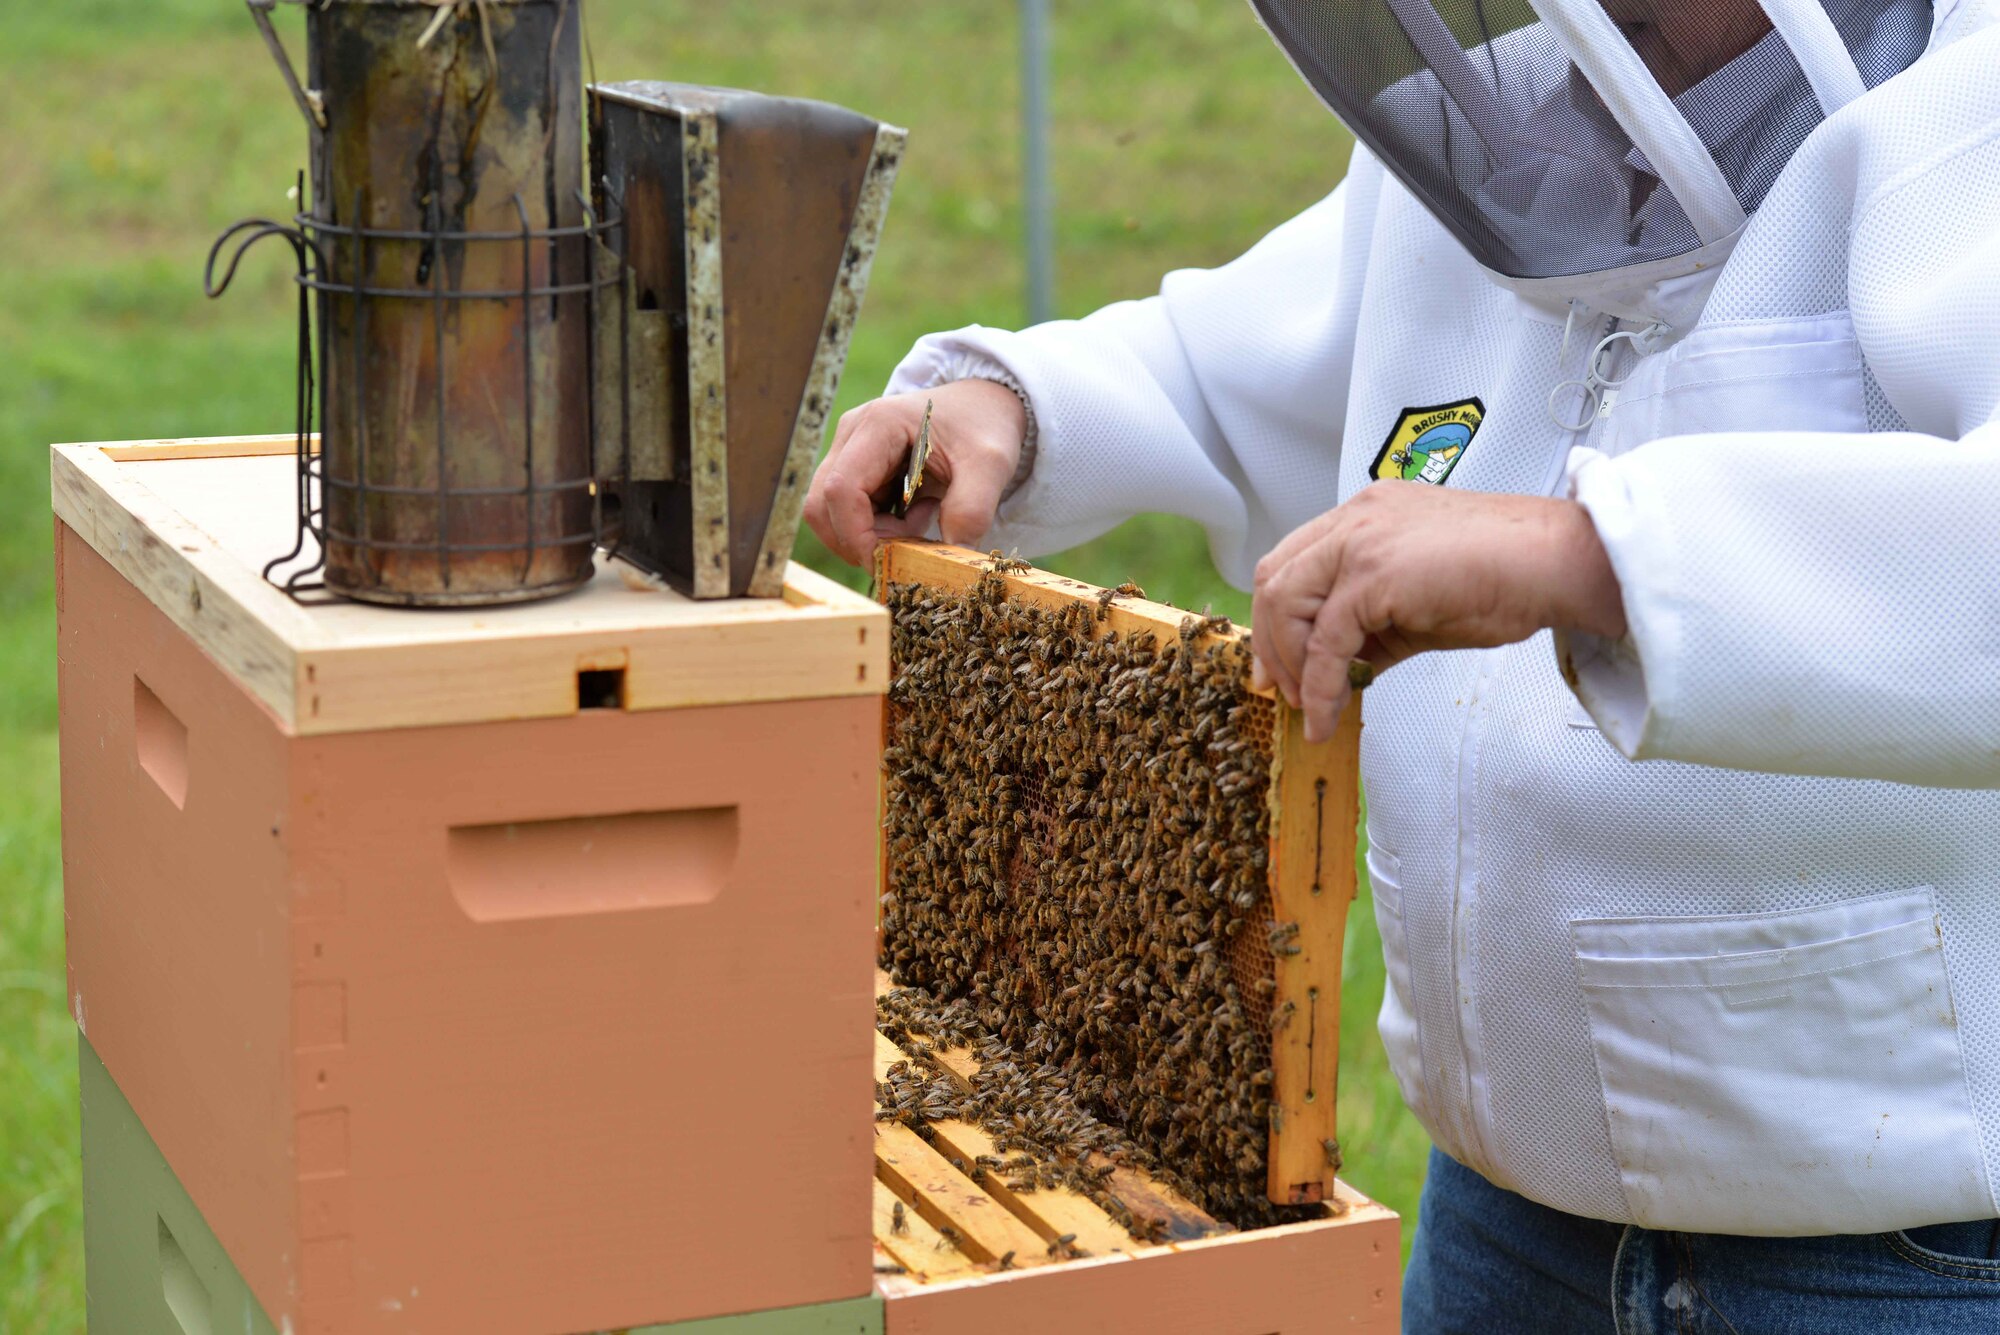 Dwight Wells, a sustainable beekeeper with the Propolis Project, LLC monitors a bee colony for evidence of naturally occurring Varroa mite resistance within the genetic gene pool of the bees at Wright-Patterson AFB. If an infected bee bitten by a Varroa mite exposes a colony to the virus, it will become fatal to the entire colony. (U.S. Air Force/Michelle Gigante)